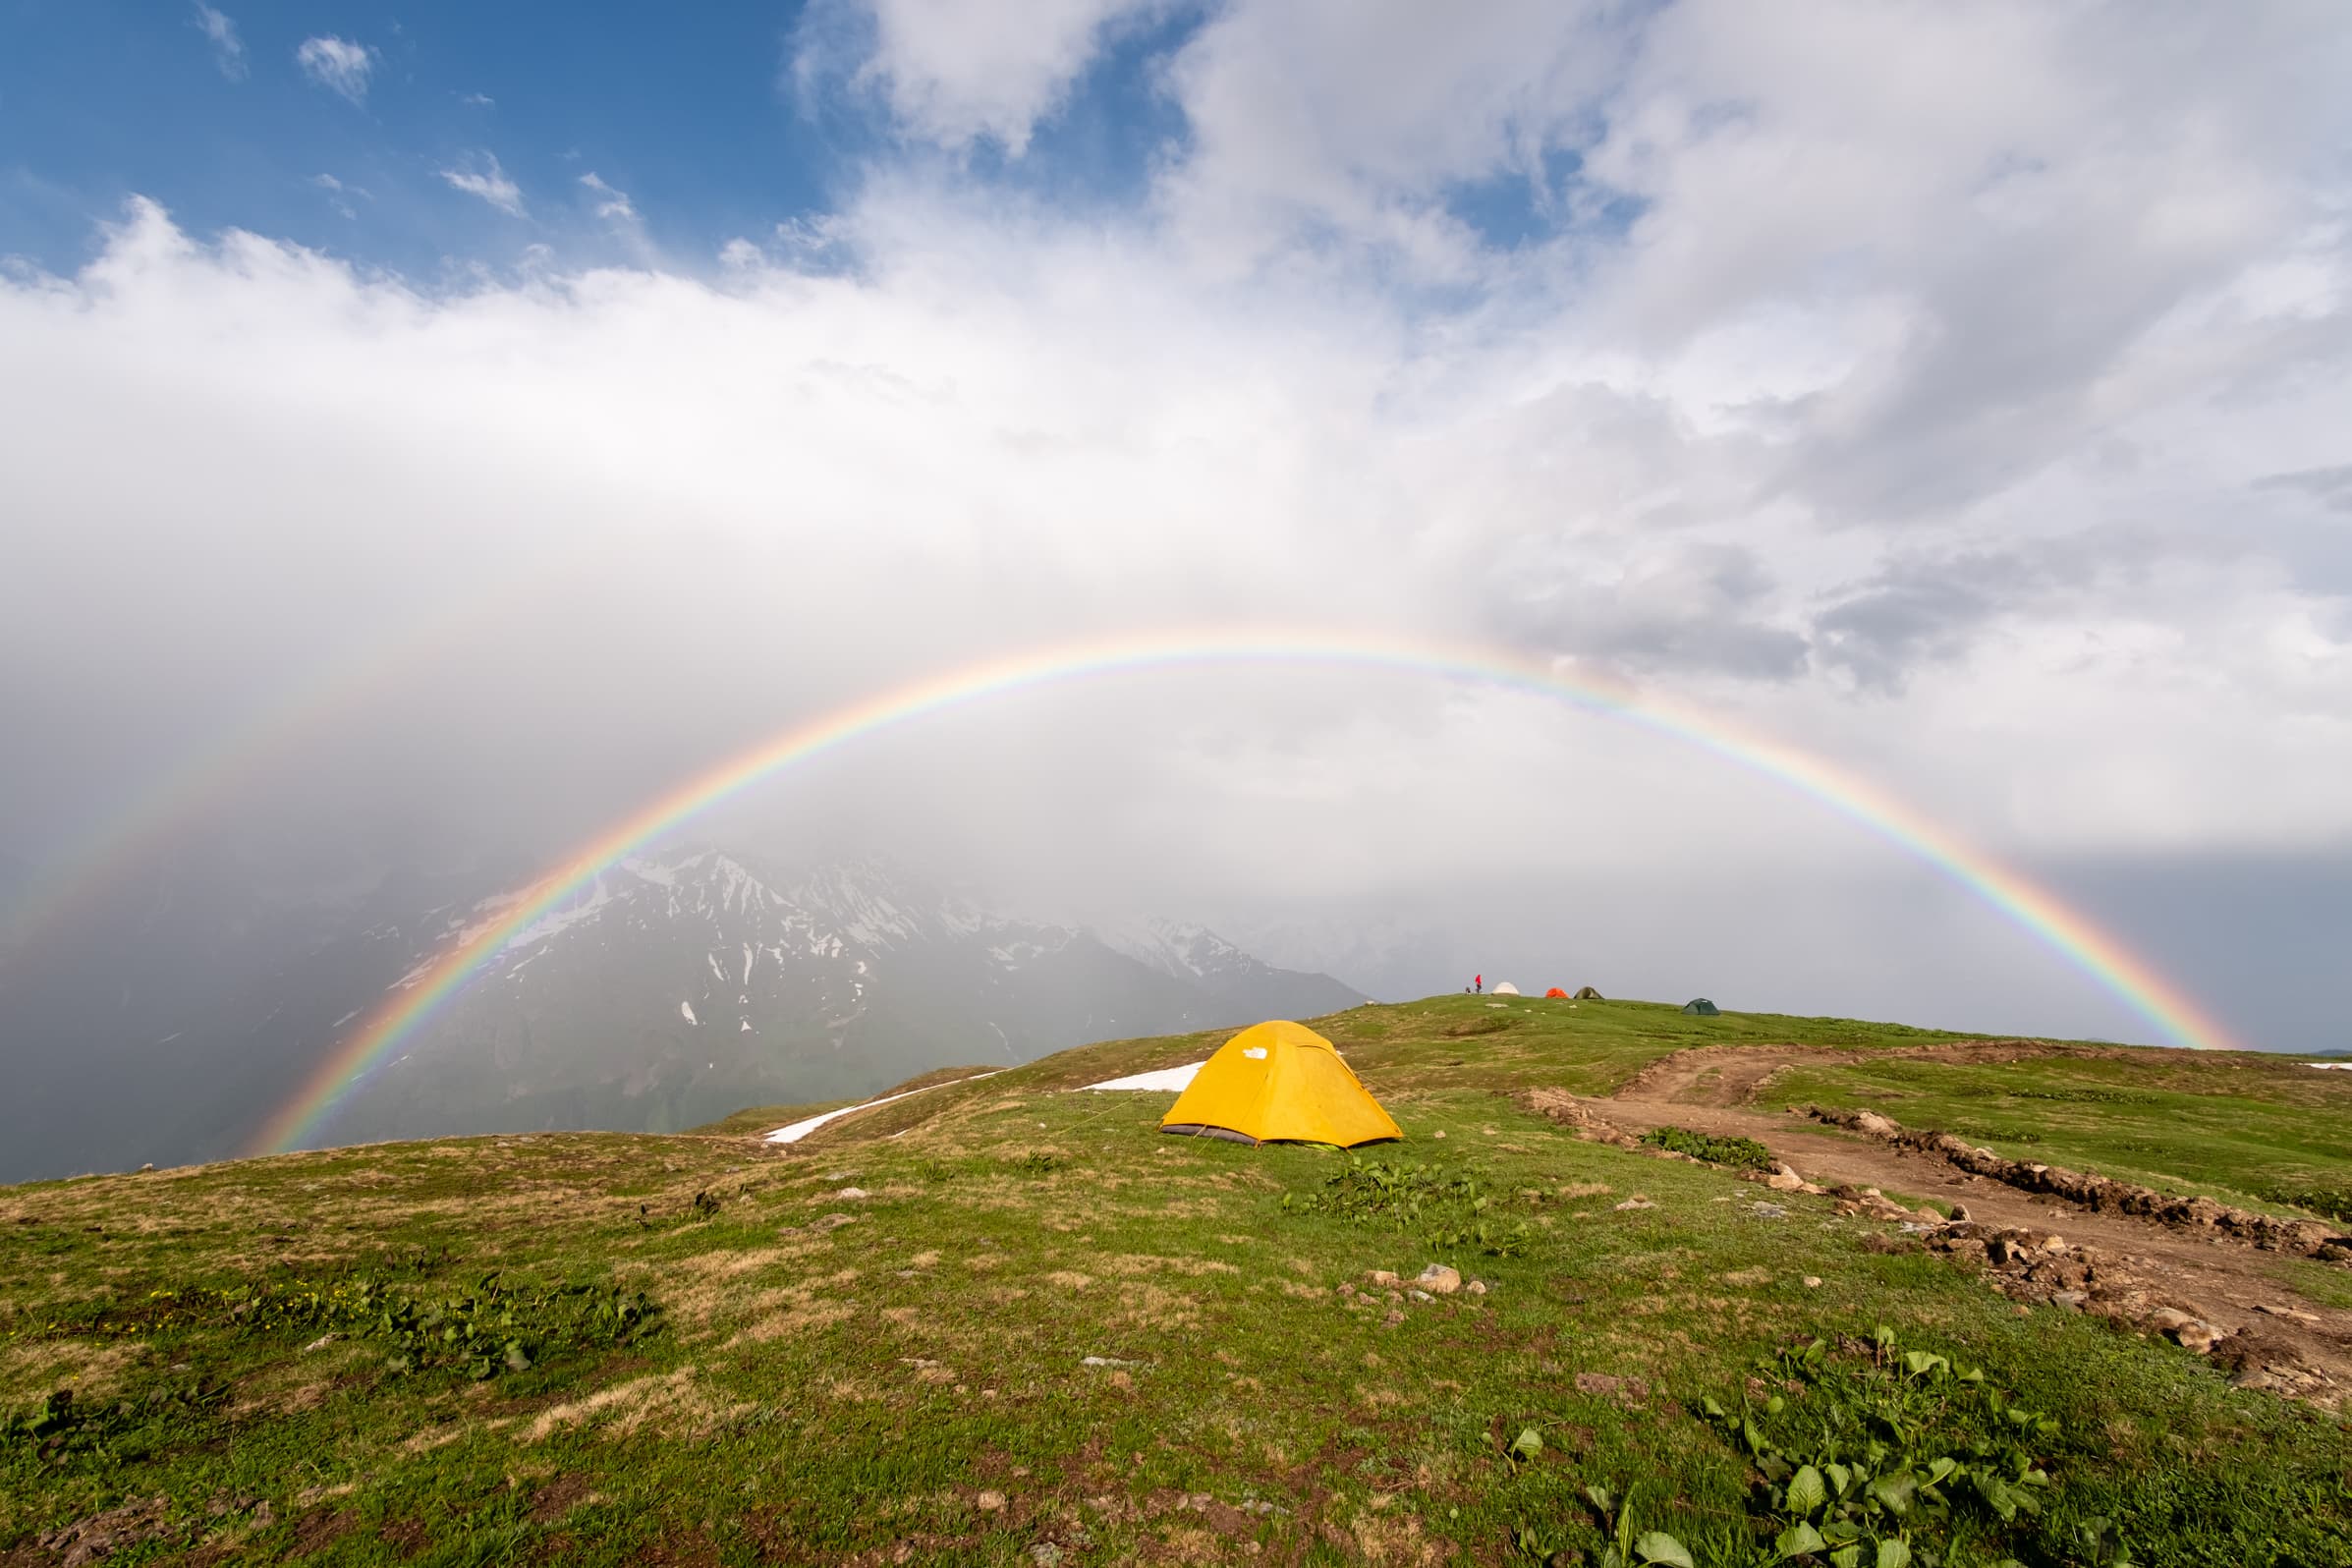 Rainbow arching over our tent after a storm at Koruldi lakes, Svaneti, Georgia